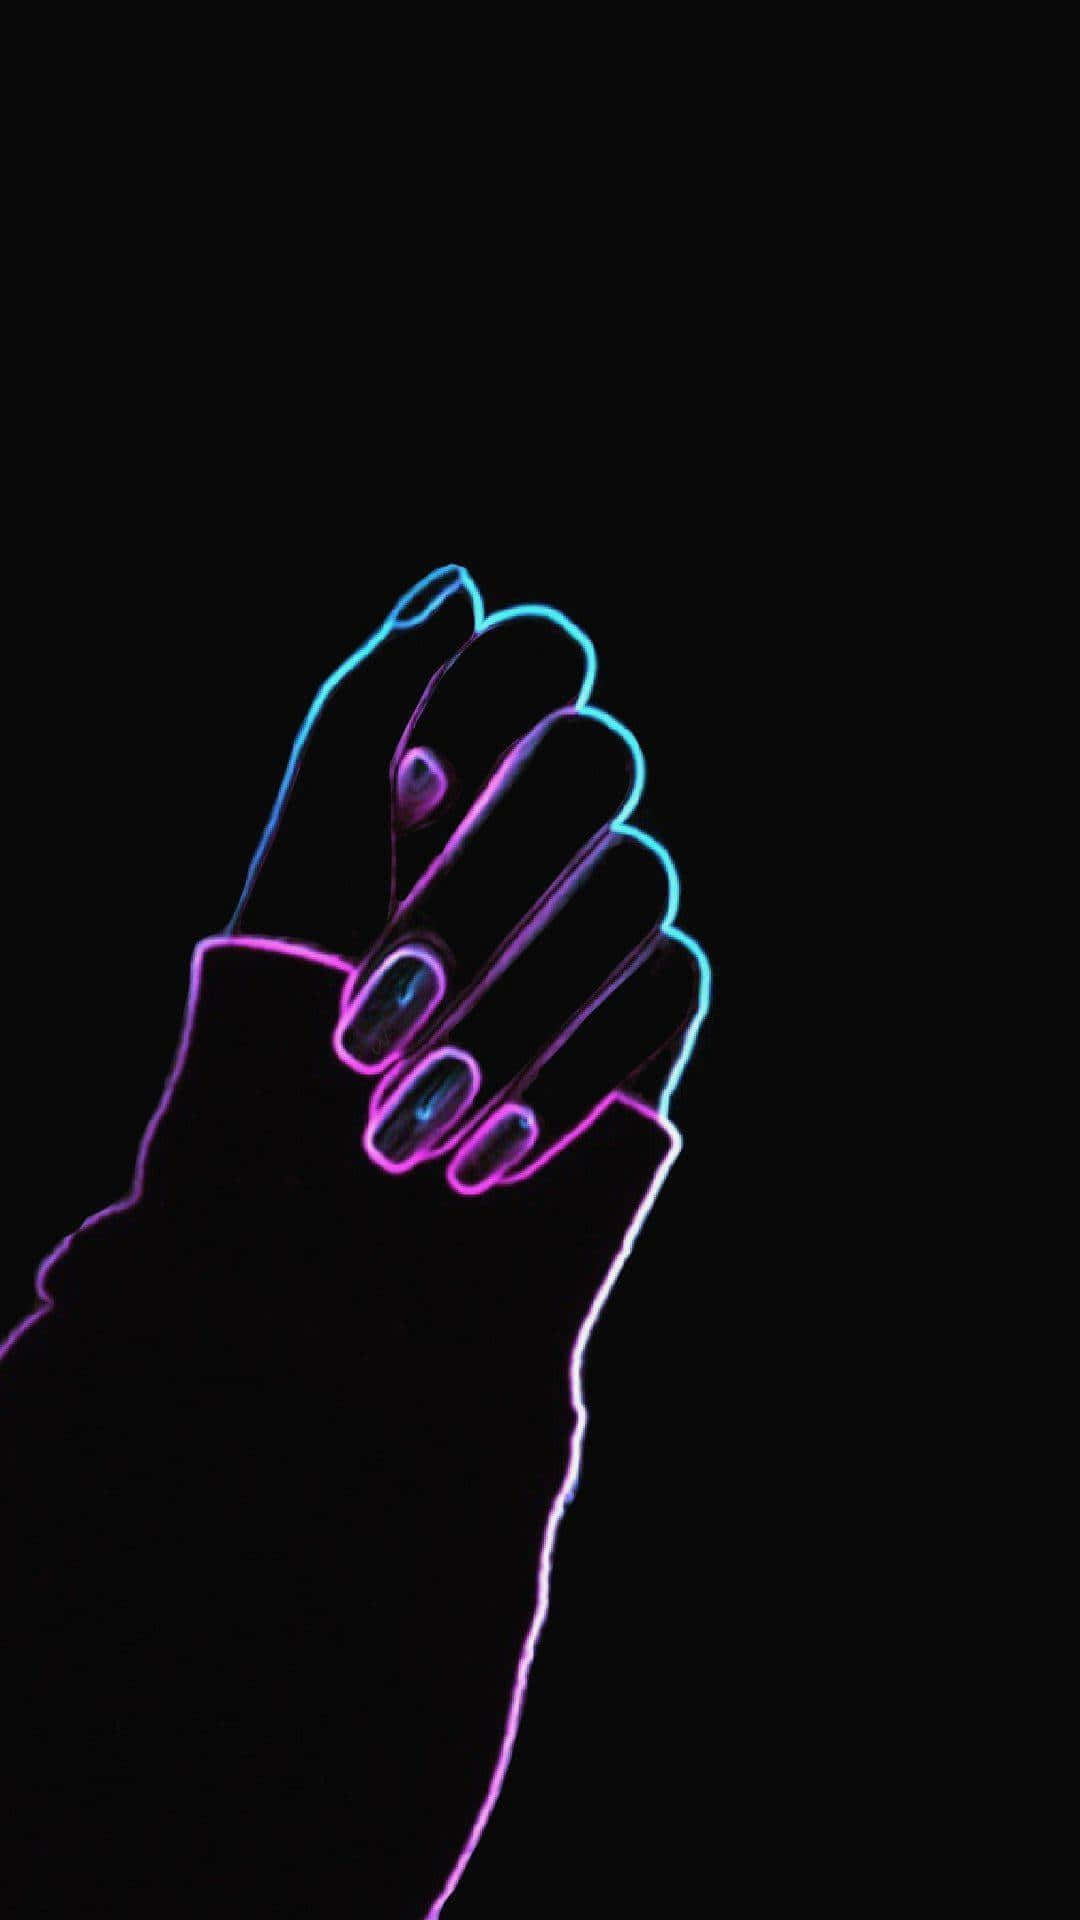 Neon Hand With Neon Nails On A Black Background